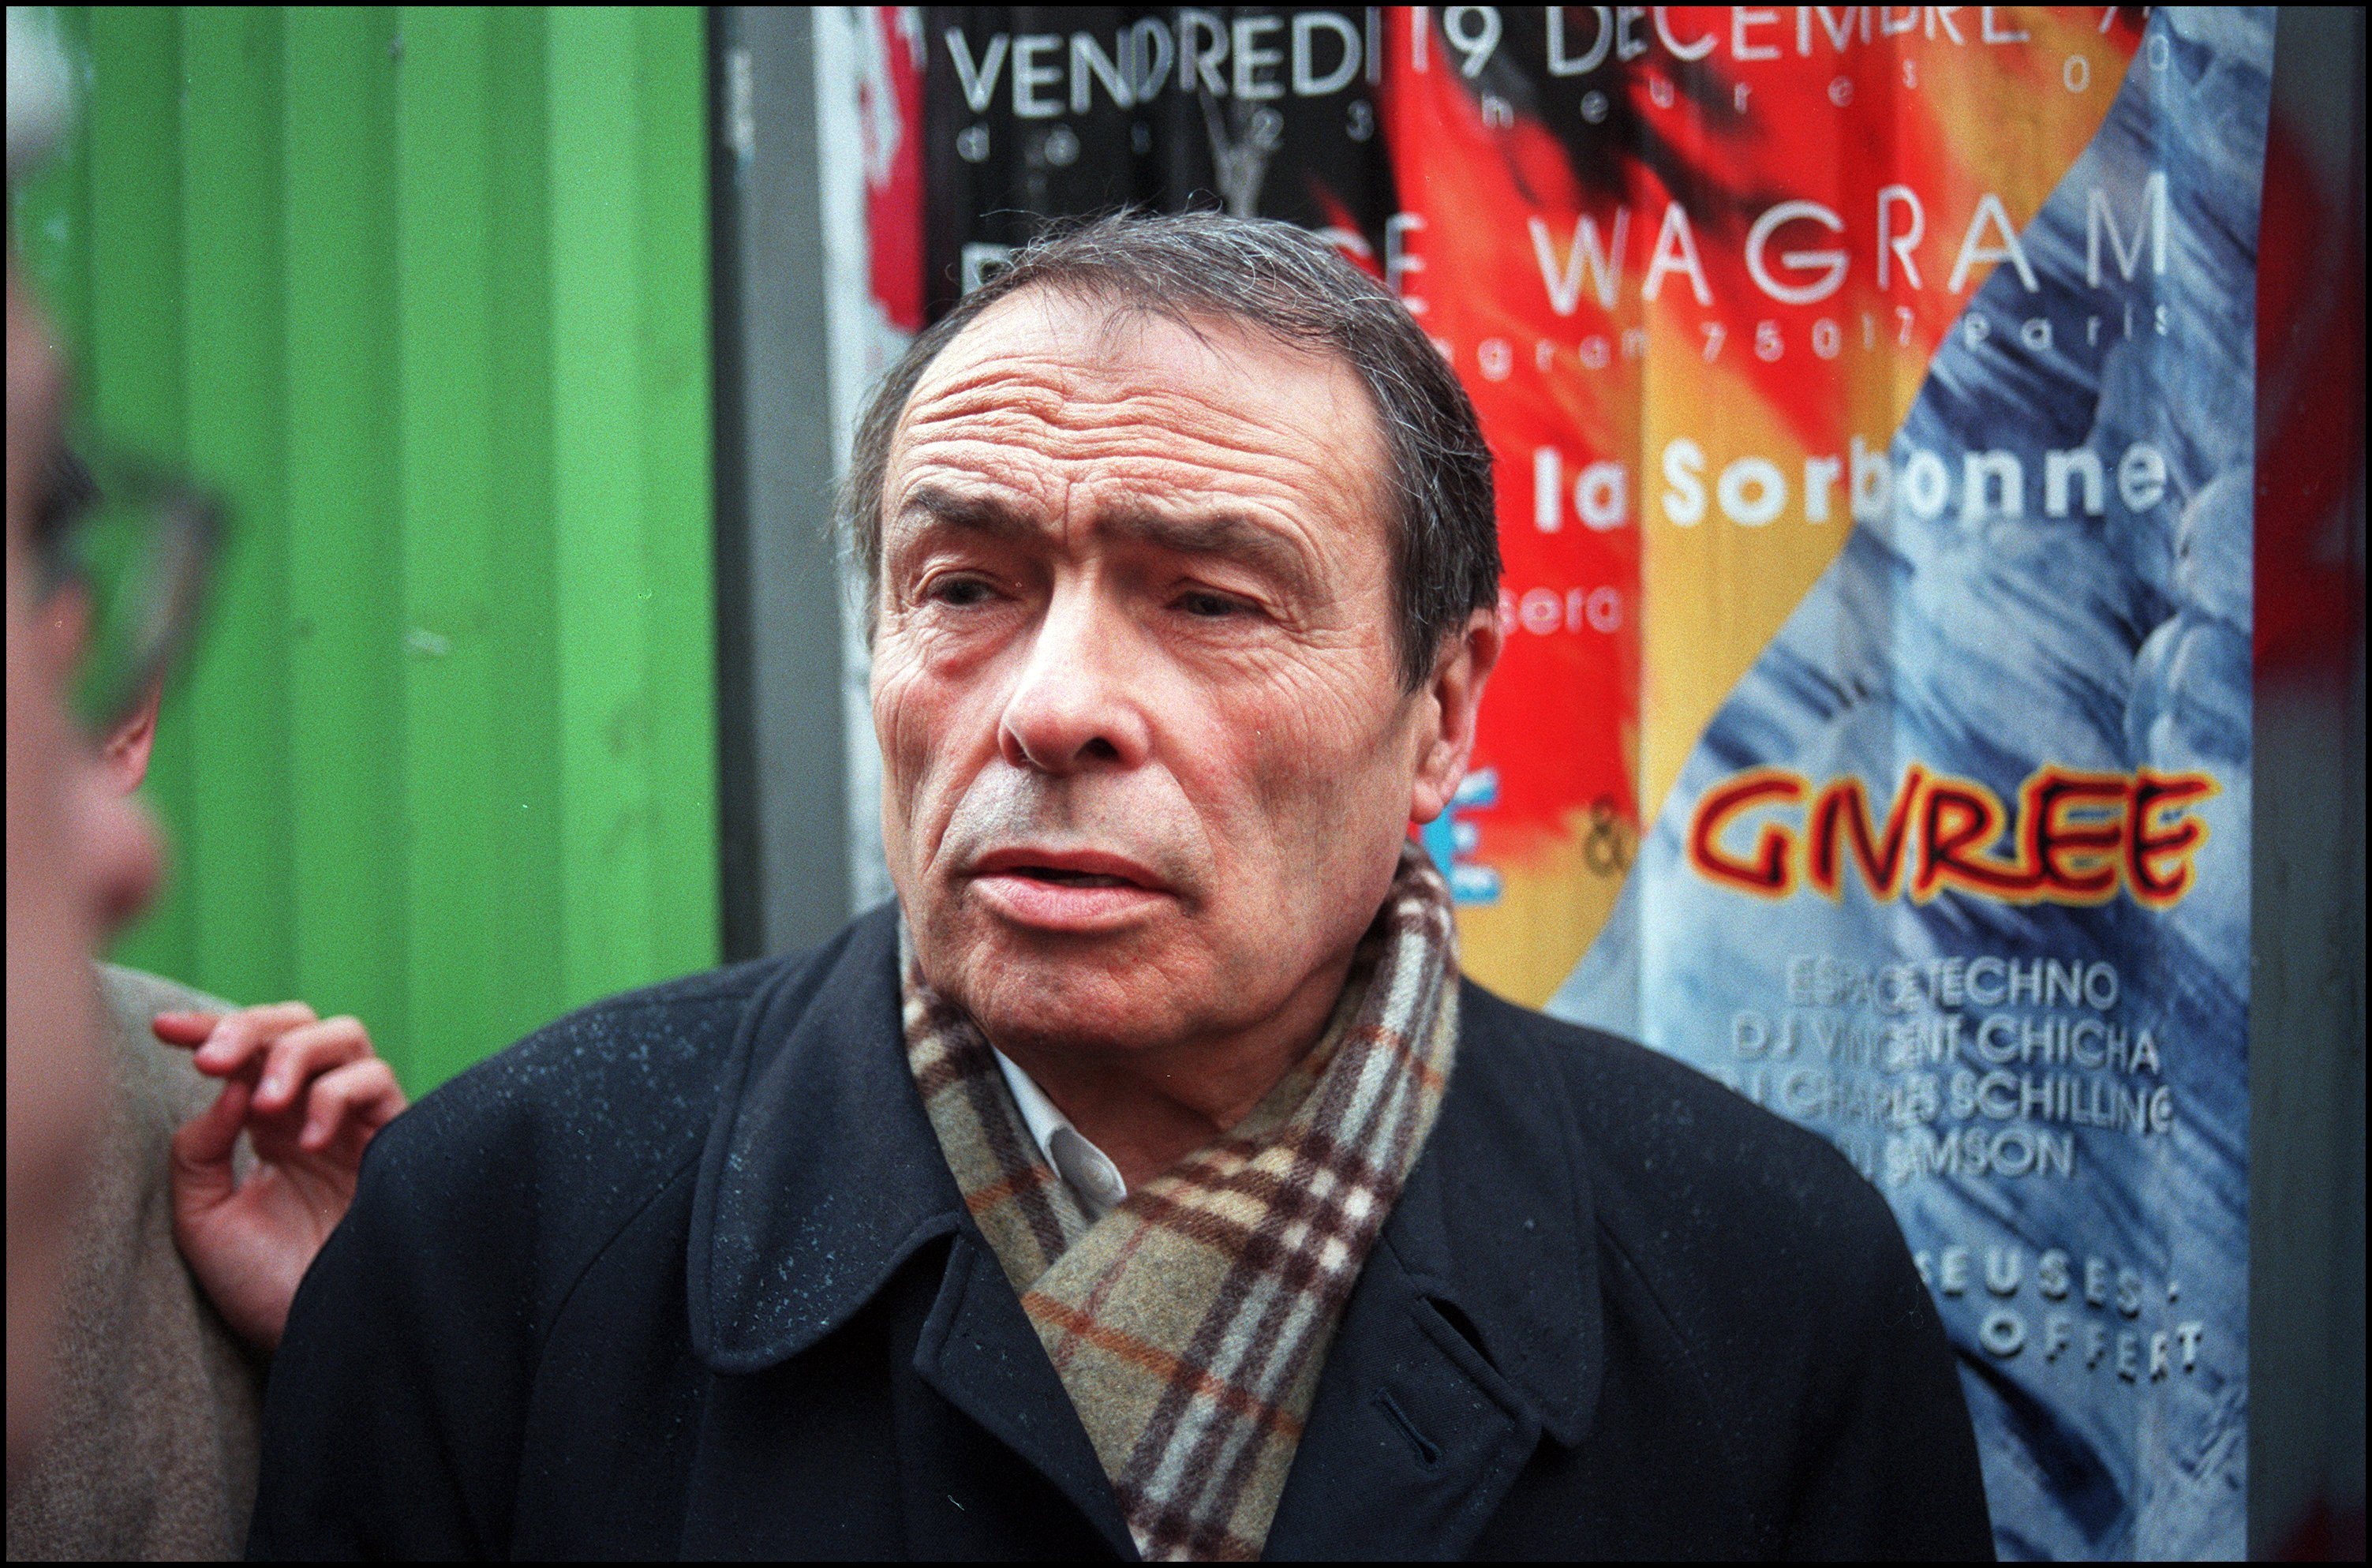 Pierre Bourdieu at an unemployed demonstration in front of &quot;Sciences Politiques&quot; and &quot;Normale Superieure&quot; schools in Paris, France on January 16, 1998.